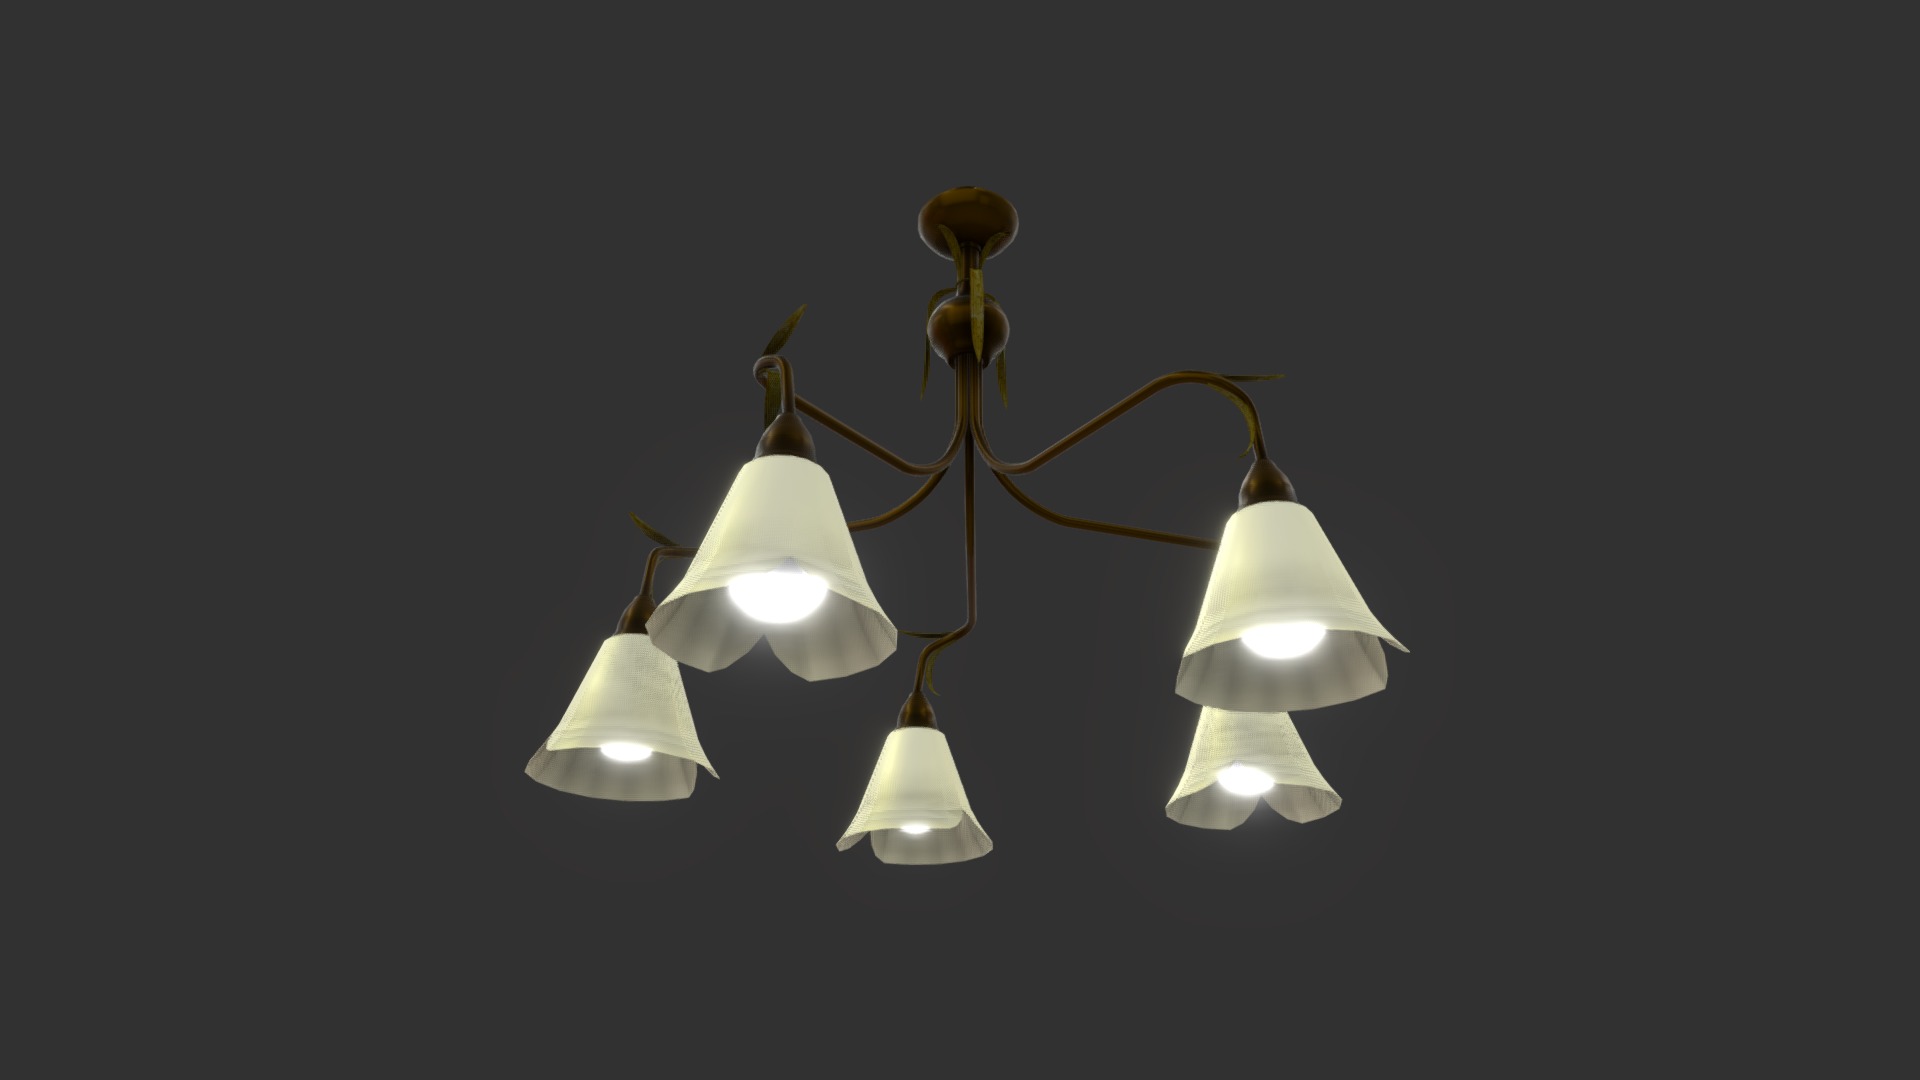 3D model HGPRGO262 - This is a 3D model of the HGPRGO262. The 3D model is about a group of light bulbs.